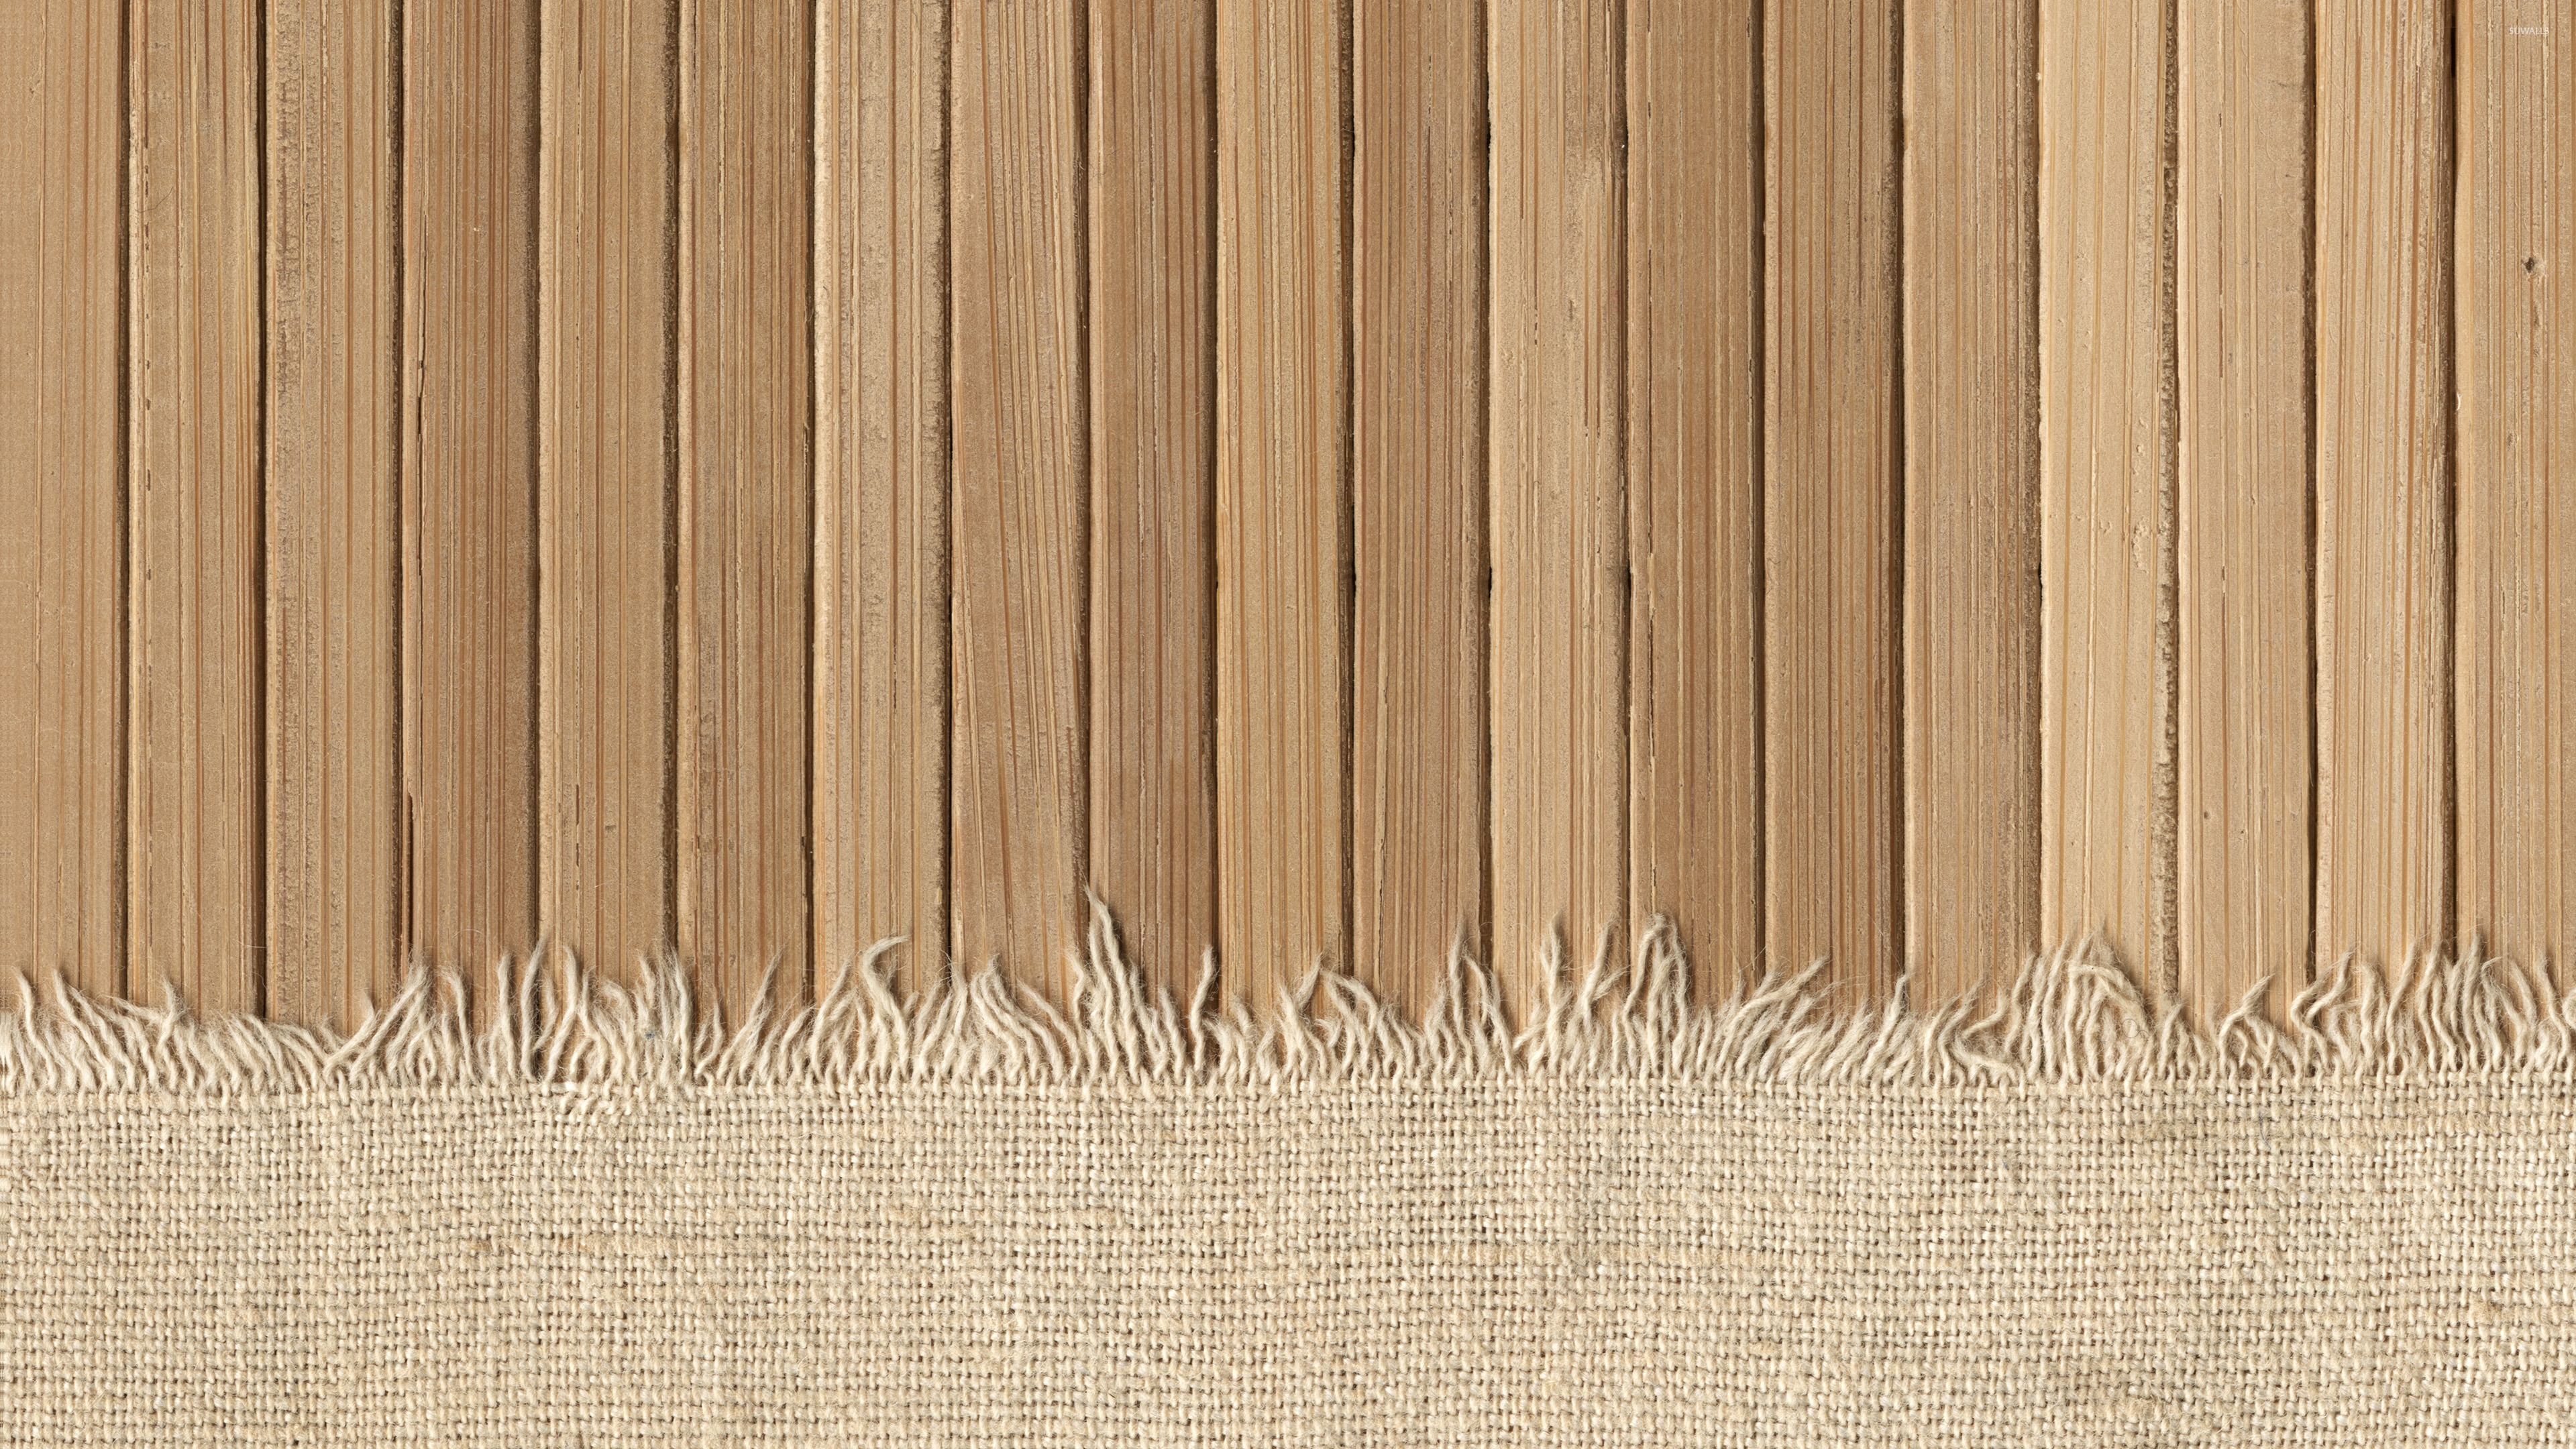 Knit fabric covering the wooden panels wallpaper - Photography ...